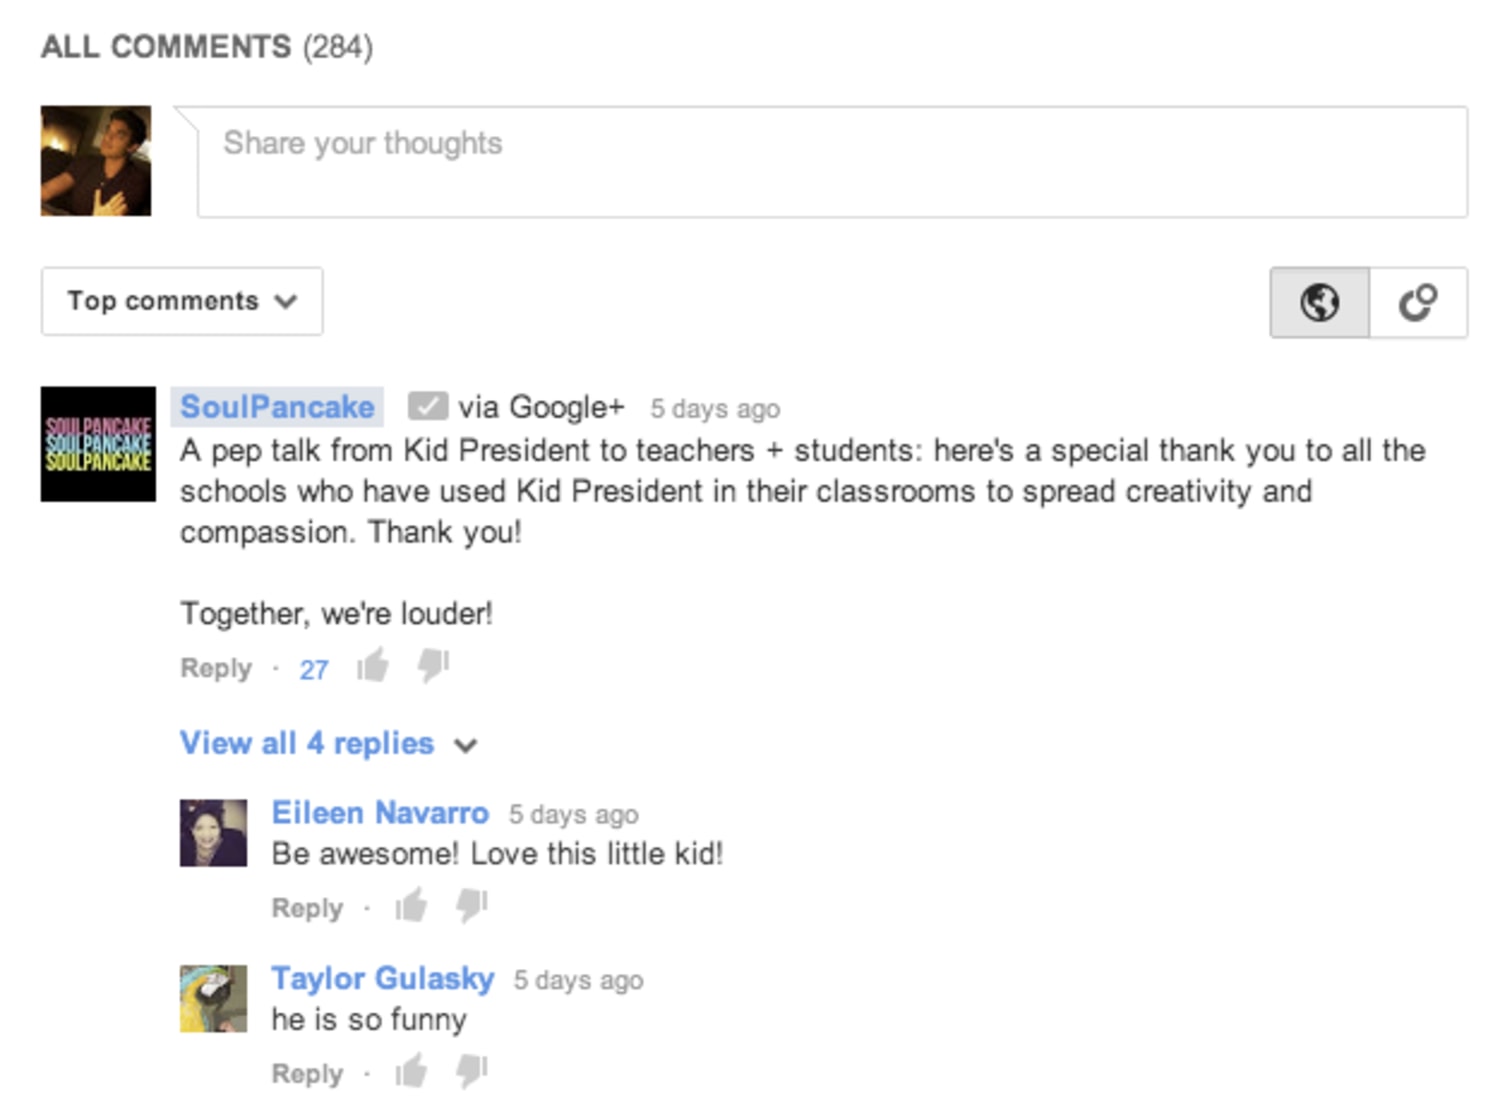 Want to comment on YouTube videos? Now you need Google+